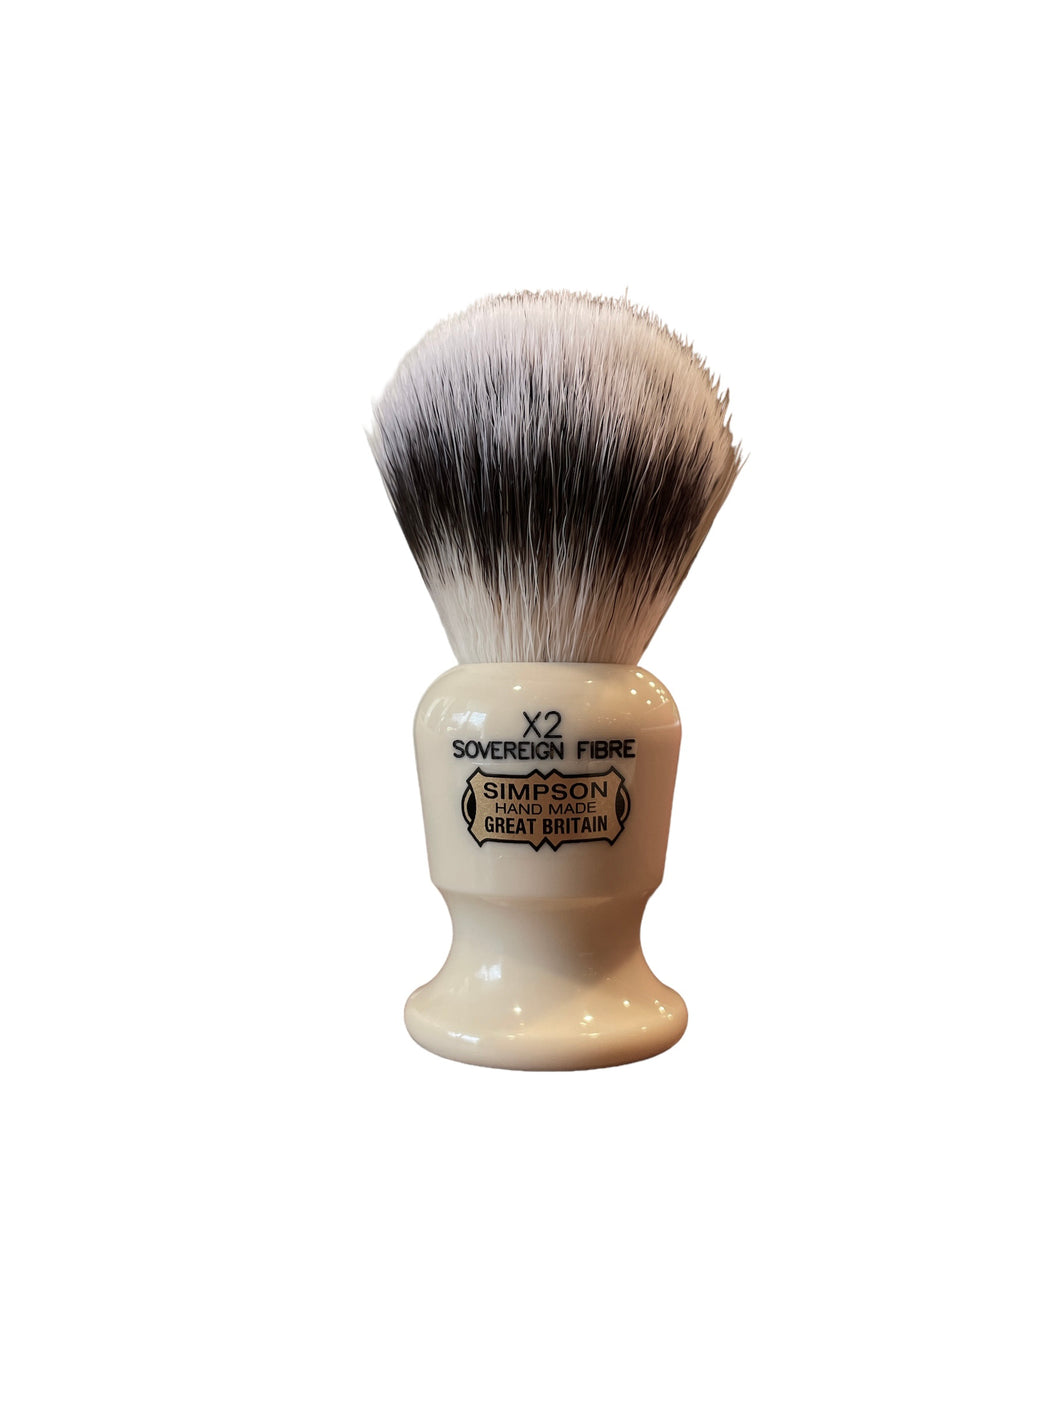 Simpsons 'Commodore X2' Sovereign Fiber Synthetic Shave Brush